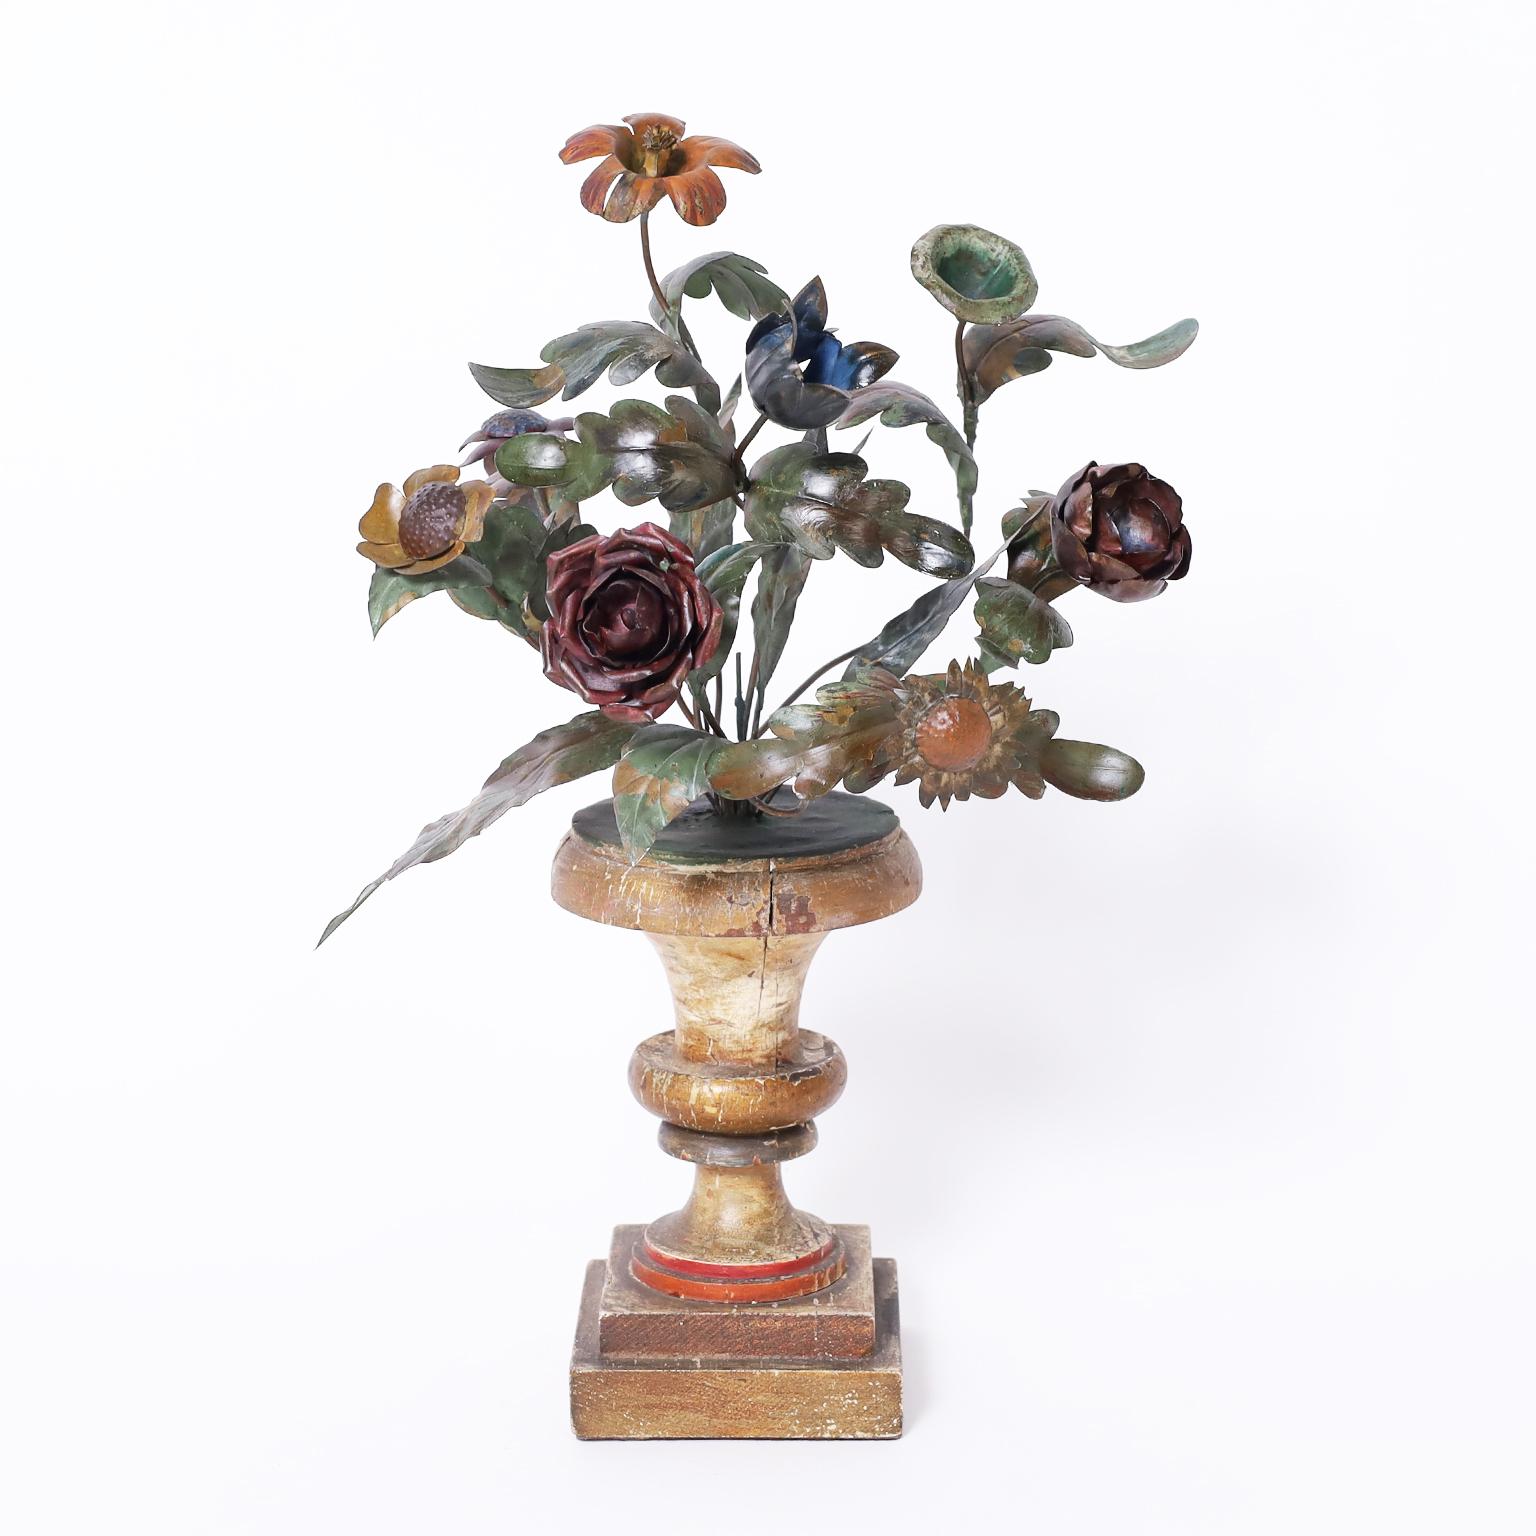 Pair of antique Italian garnitures with floral tole bouquets in classical wood urns retaining their original paint.